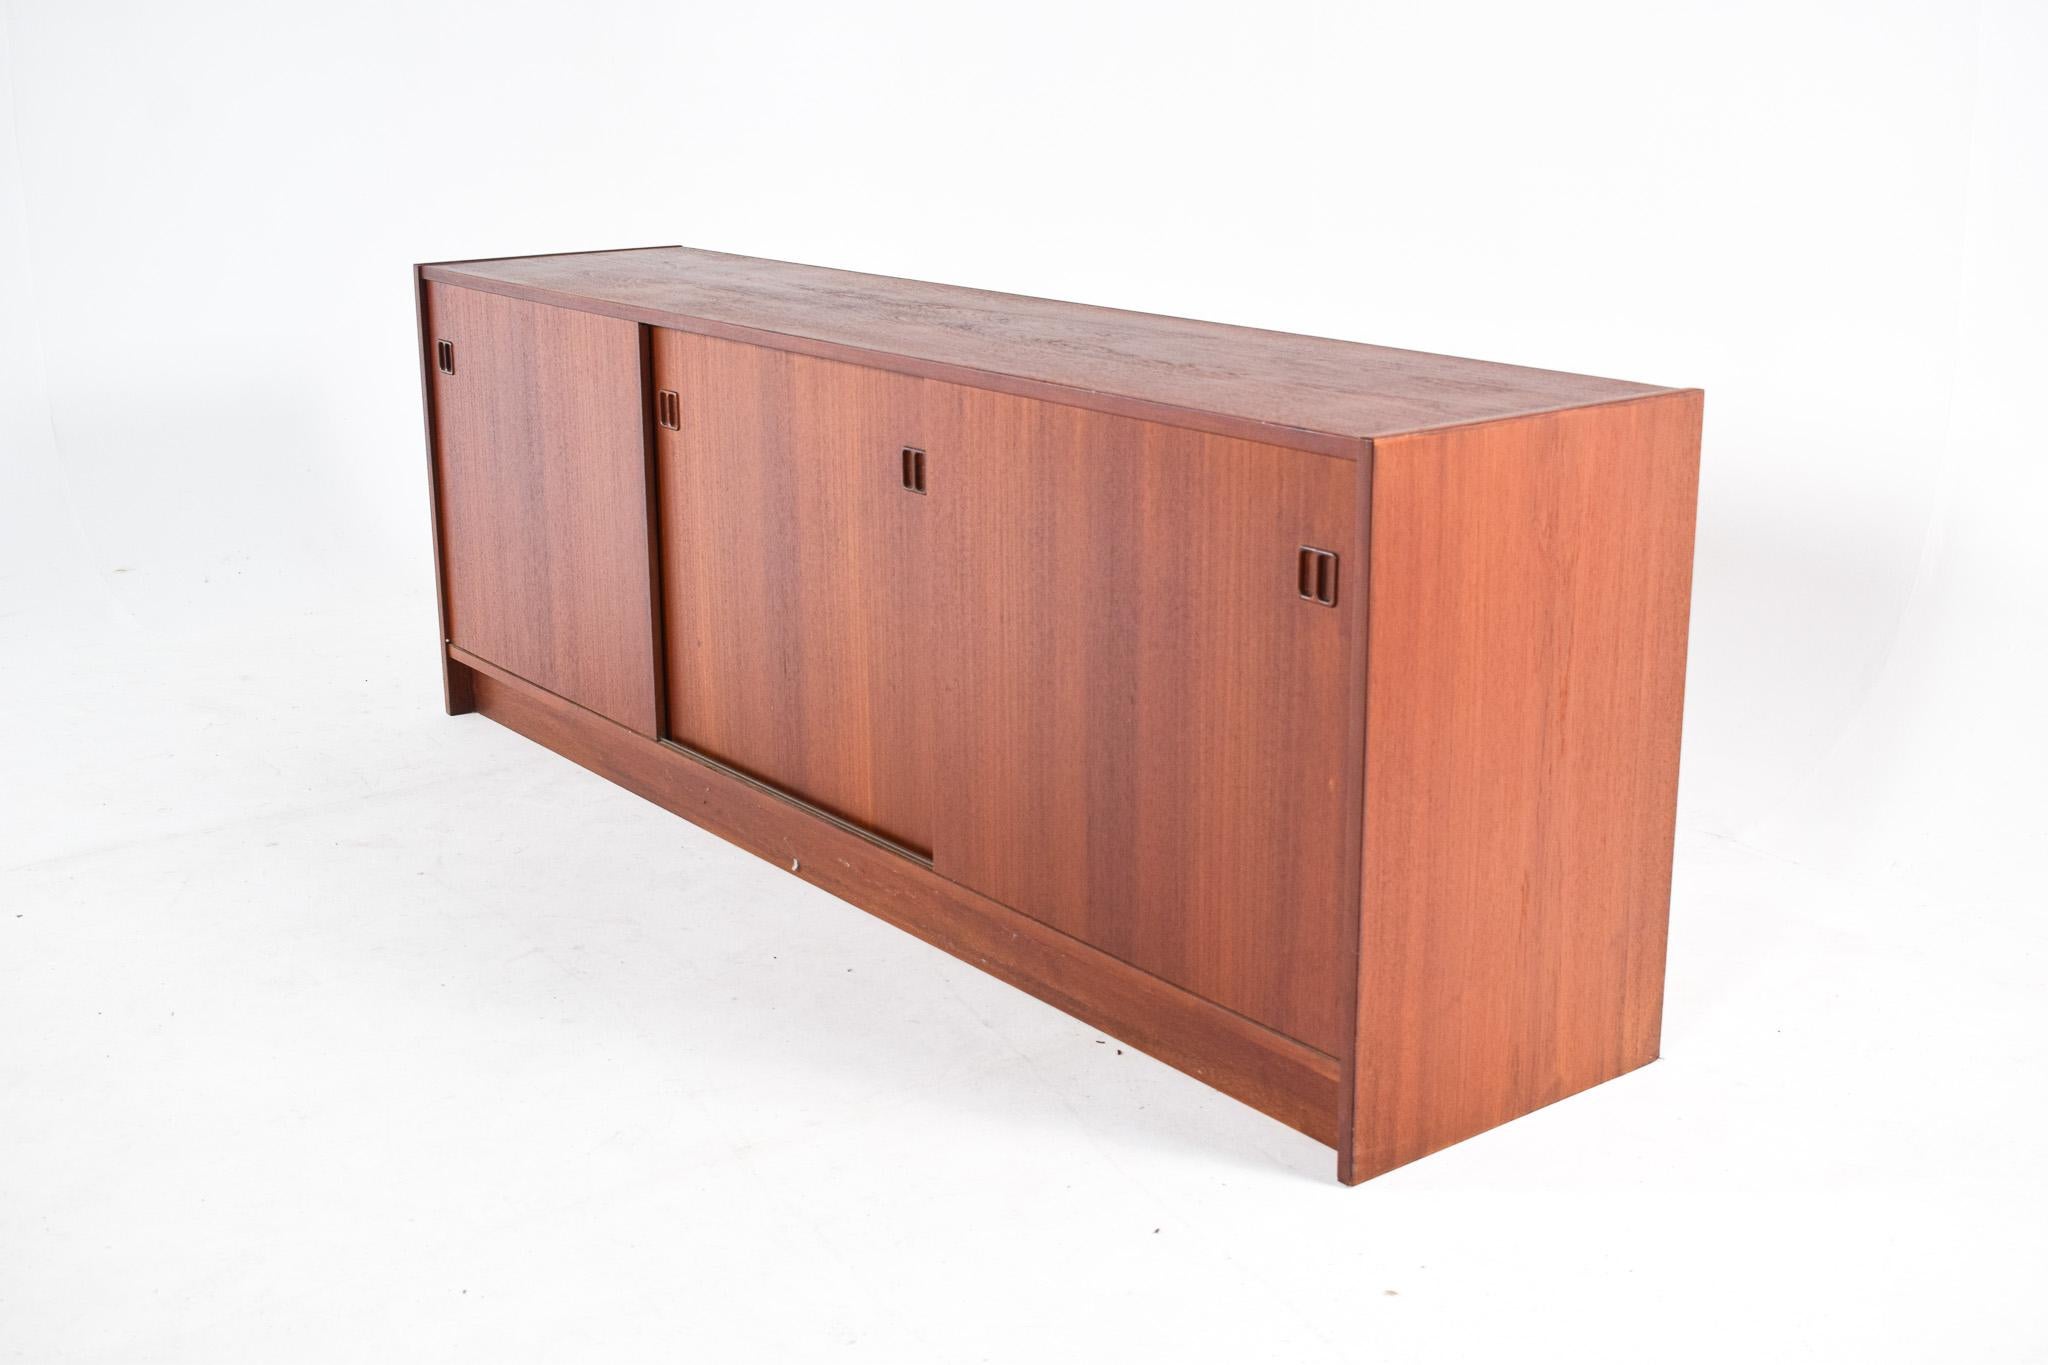 This image shows a quintessential mid-century teak sideboard that exudes the simplicity, warmth, and functional design characteristic of the period. The sideboard's long, low profile is typical of mid-century modern furniture, suggesting a subtle